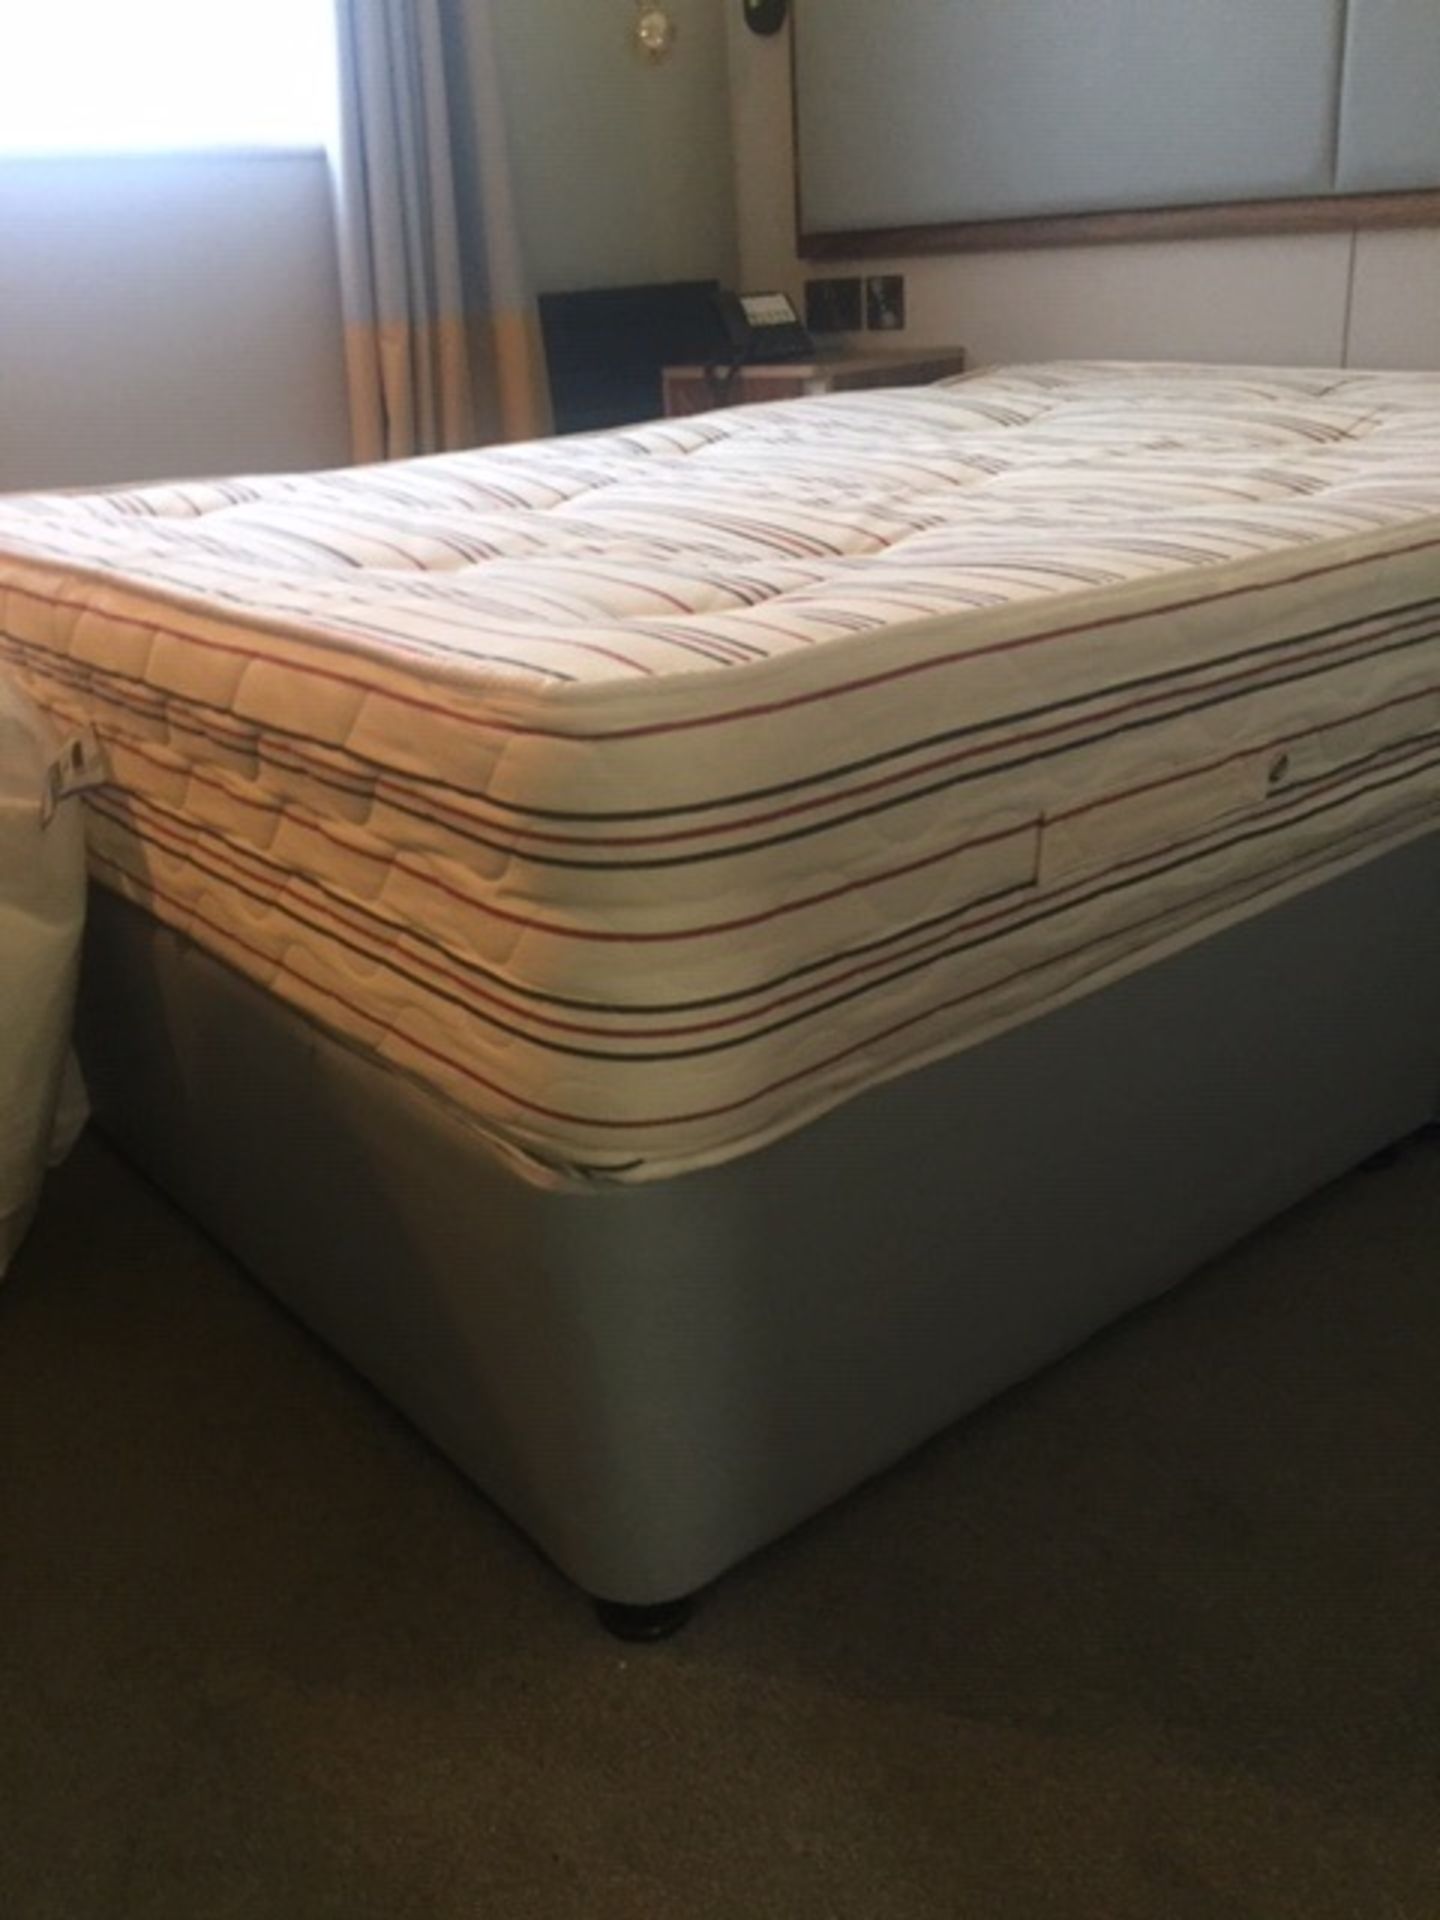 Set of matching bedroom furniture and ancillary items under 3 years old and in excellent condition - Image 9 of 32